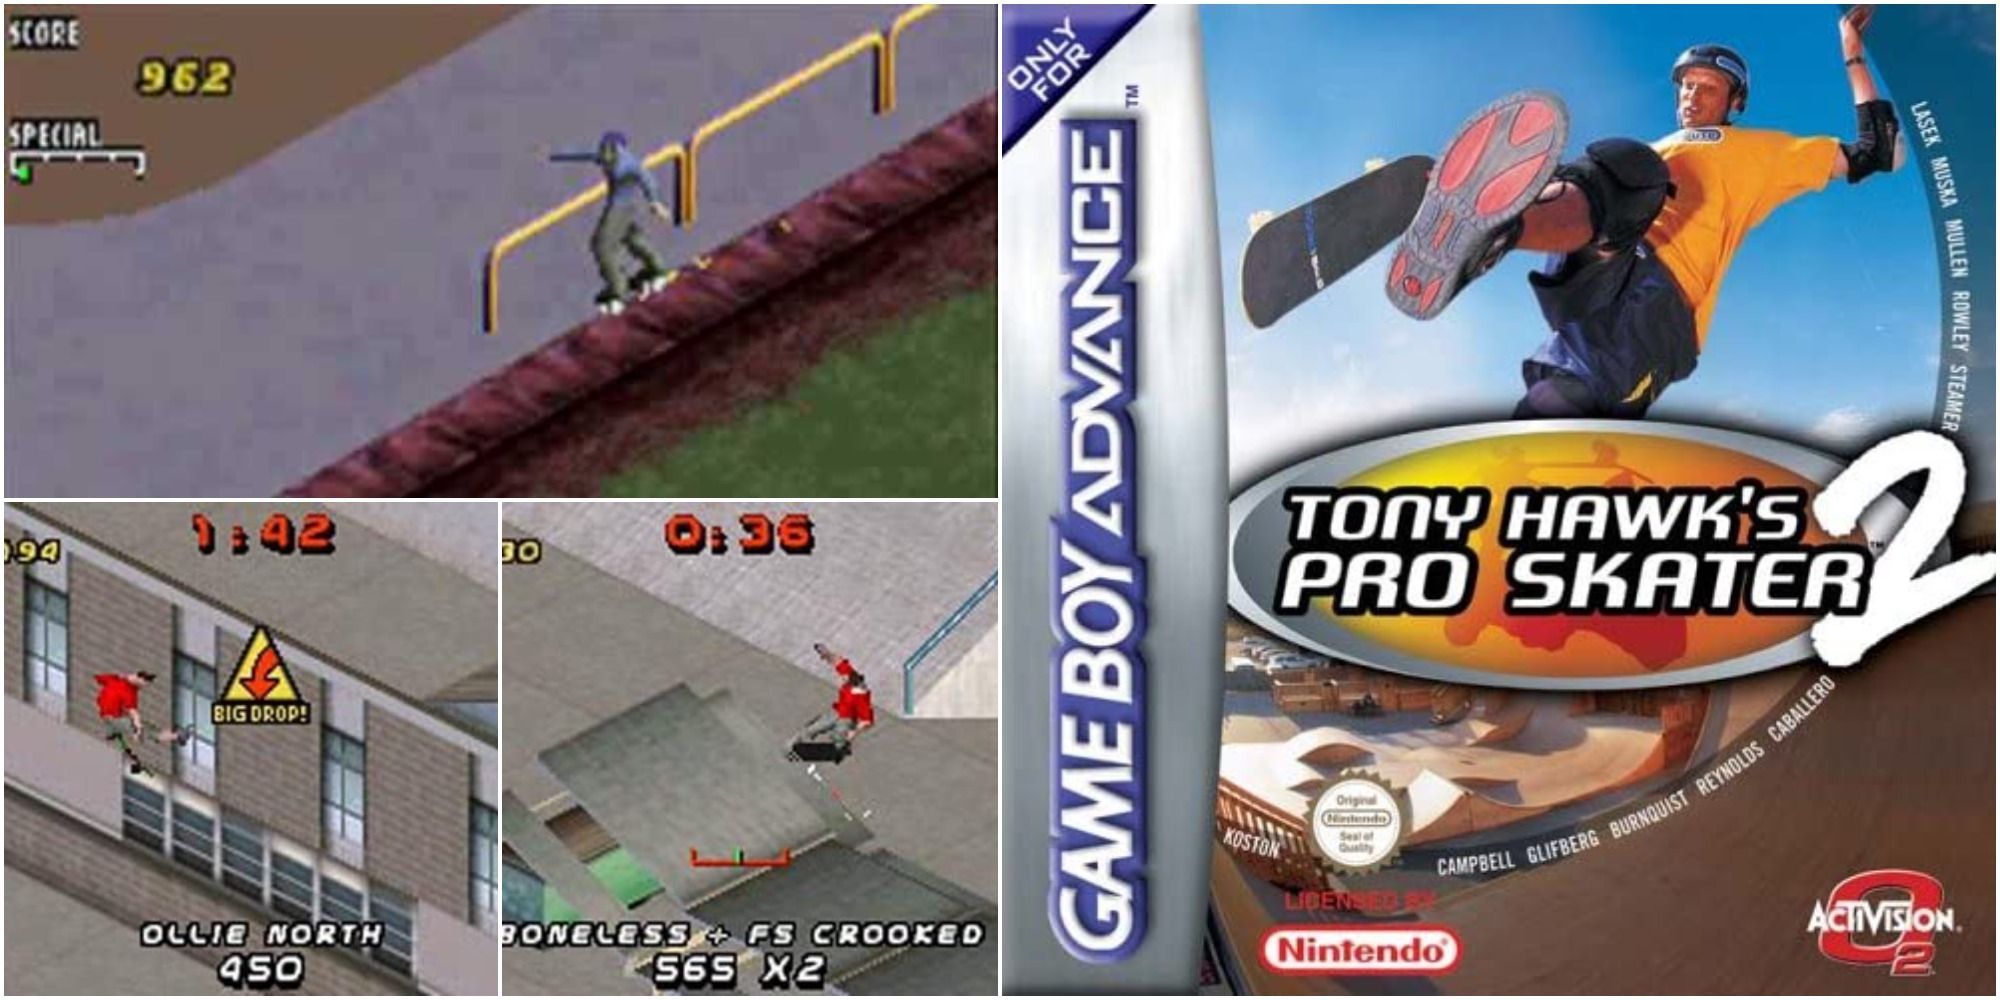 Tony Hawk's Pro Skater 2 on the Game Boy Advance, screenshot and cover split.